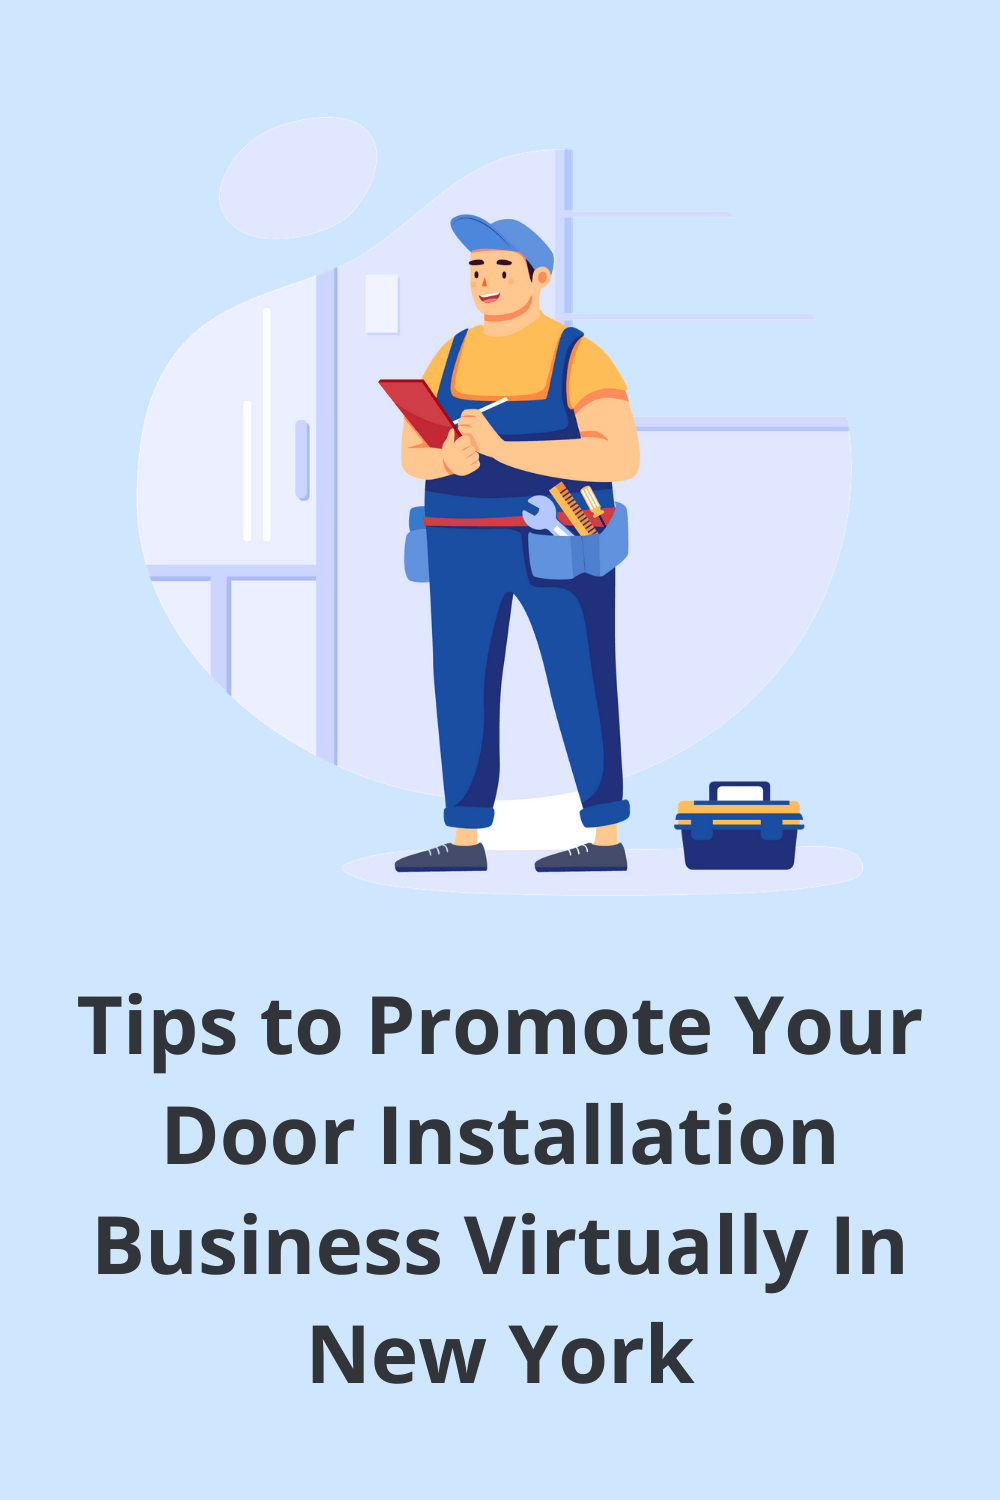 As a Door Installation Company, you must keep ahead of the competition. The tips below help you switch your Door Installation Business to the next level! via @scopedesign